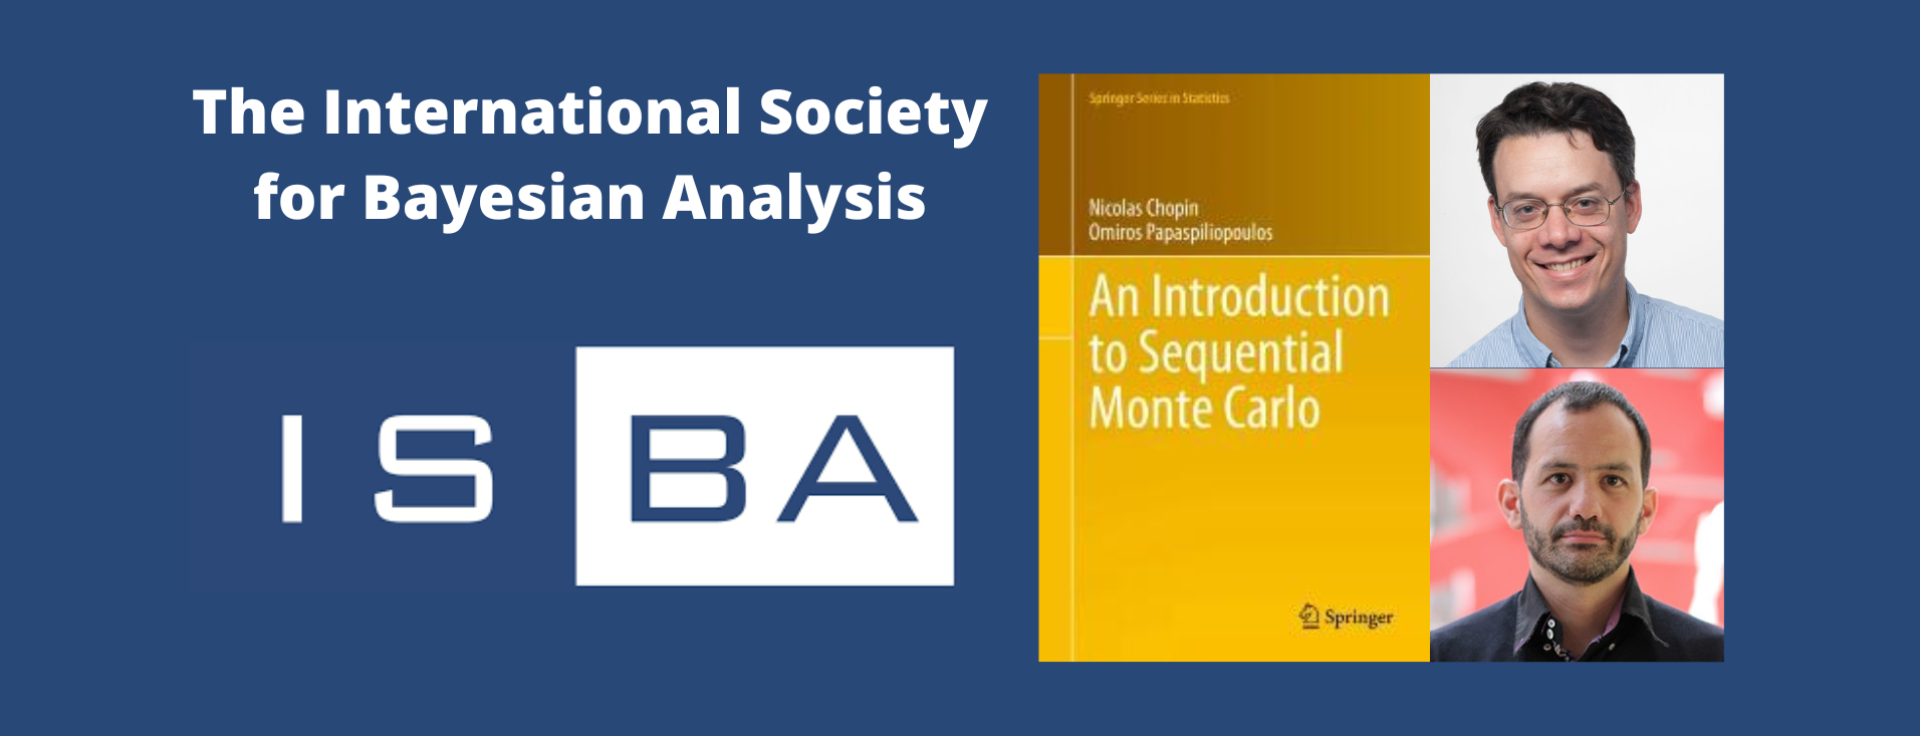 “An Introduction to Sequential Monte Carlo” wins the DeGroot Prize